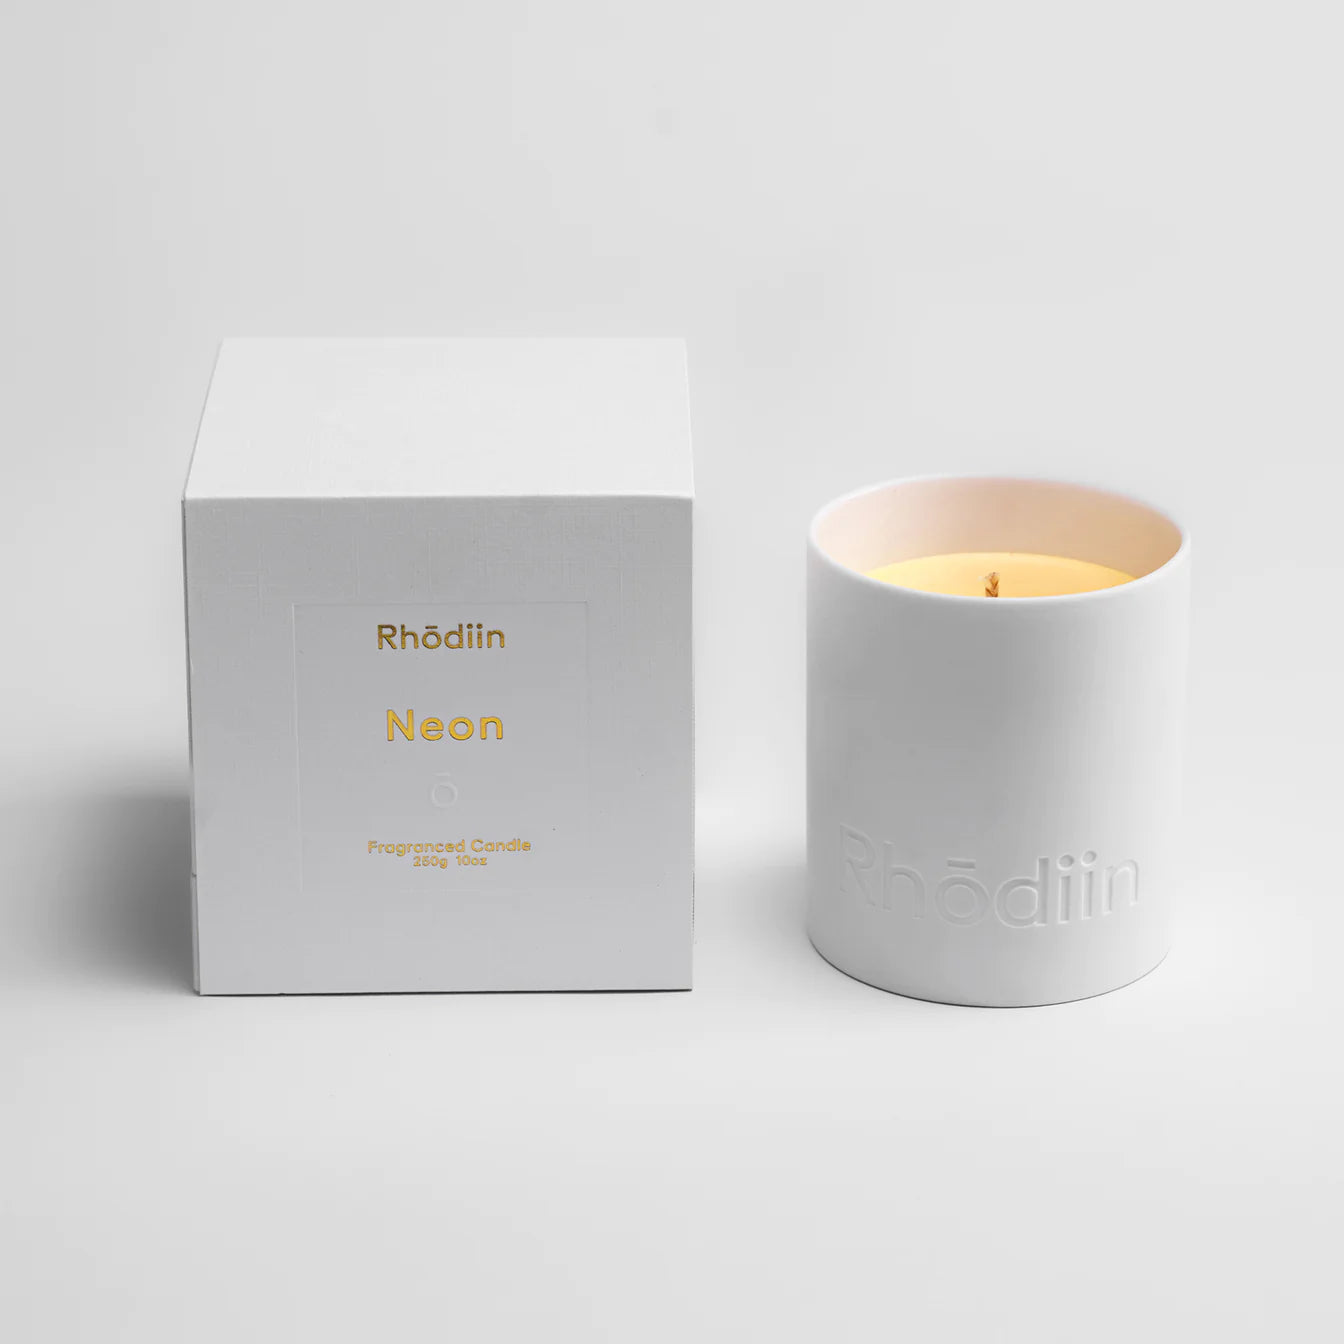 Rhodin Neon Candle 280g